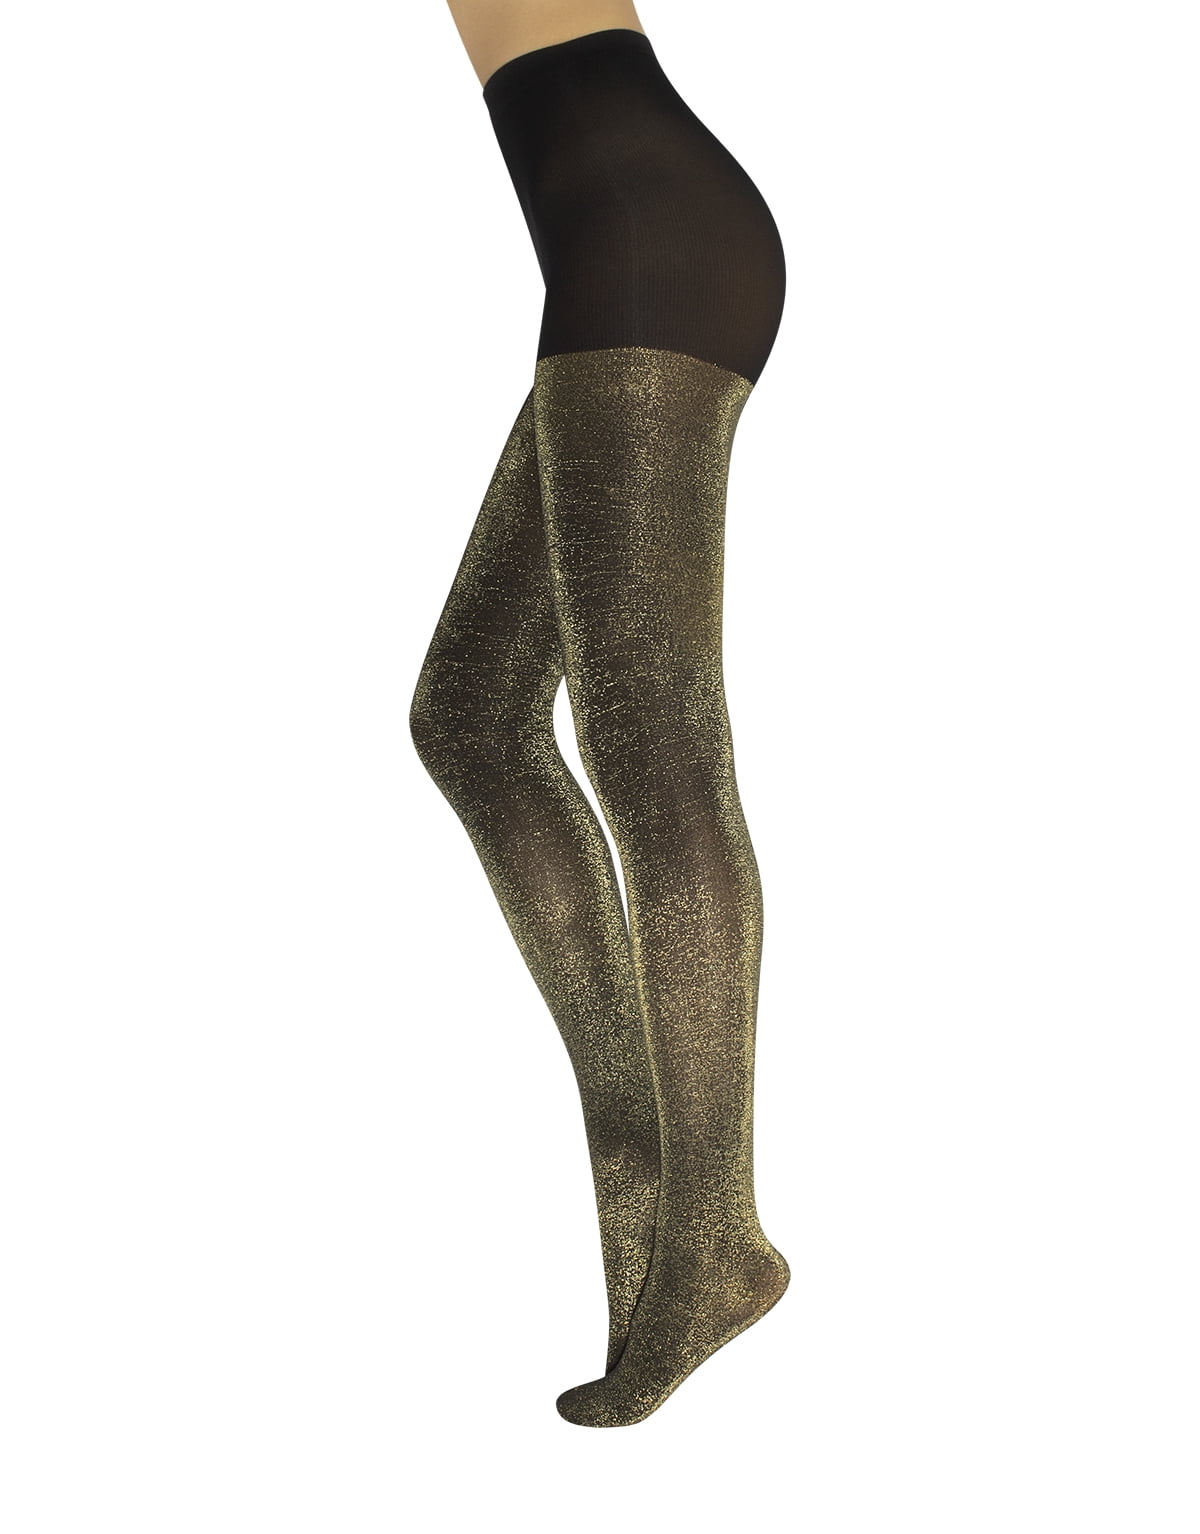 CALZITALY - Opaque Lurex Sparky Tights – Gold and Silver Glitter Pantyhose  for Women – 60 DEN (Size: S/M, Color: Black/Gold)